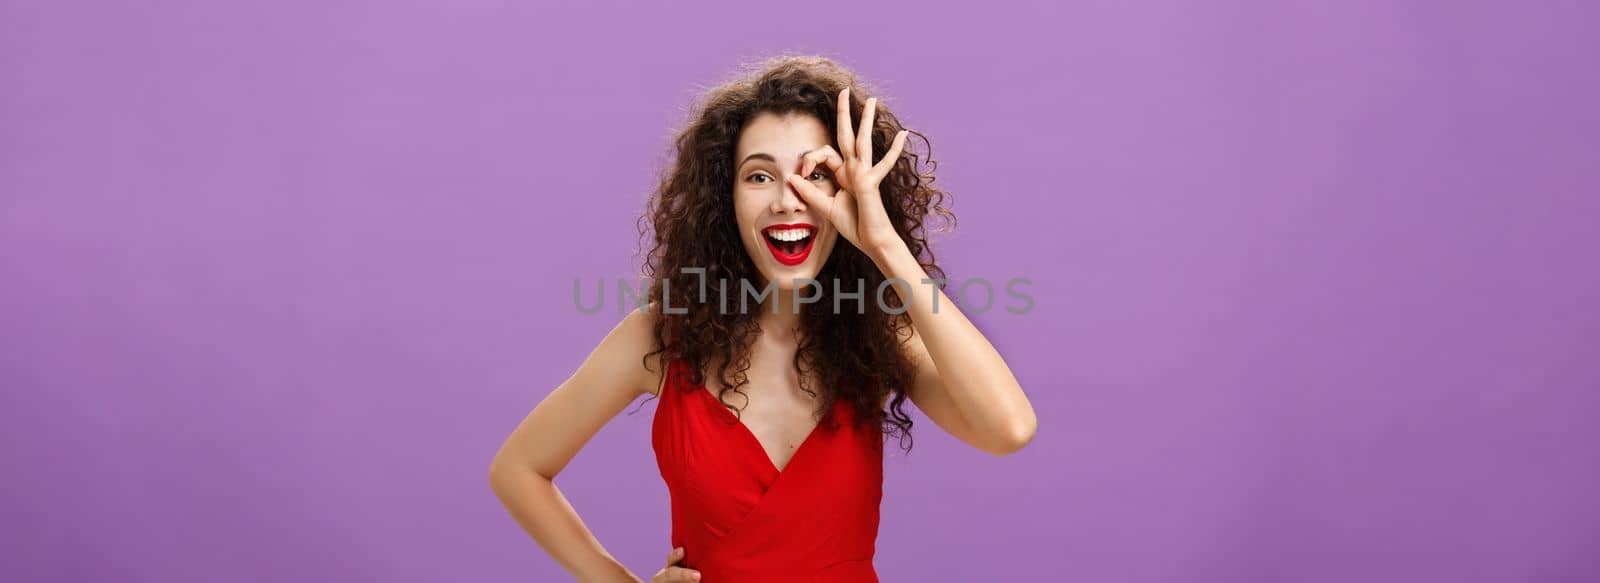 I got zero worries. Portrait of joyful friendly and happy charming woman with curly hairstyle in elegant red dress holding hand on waist smiling amused showing okay sign over eye looking through it by Benzoix